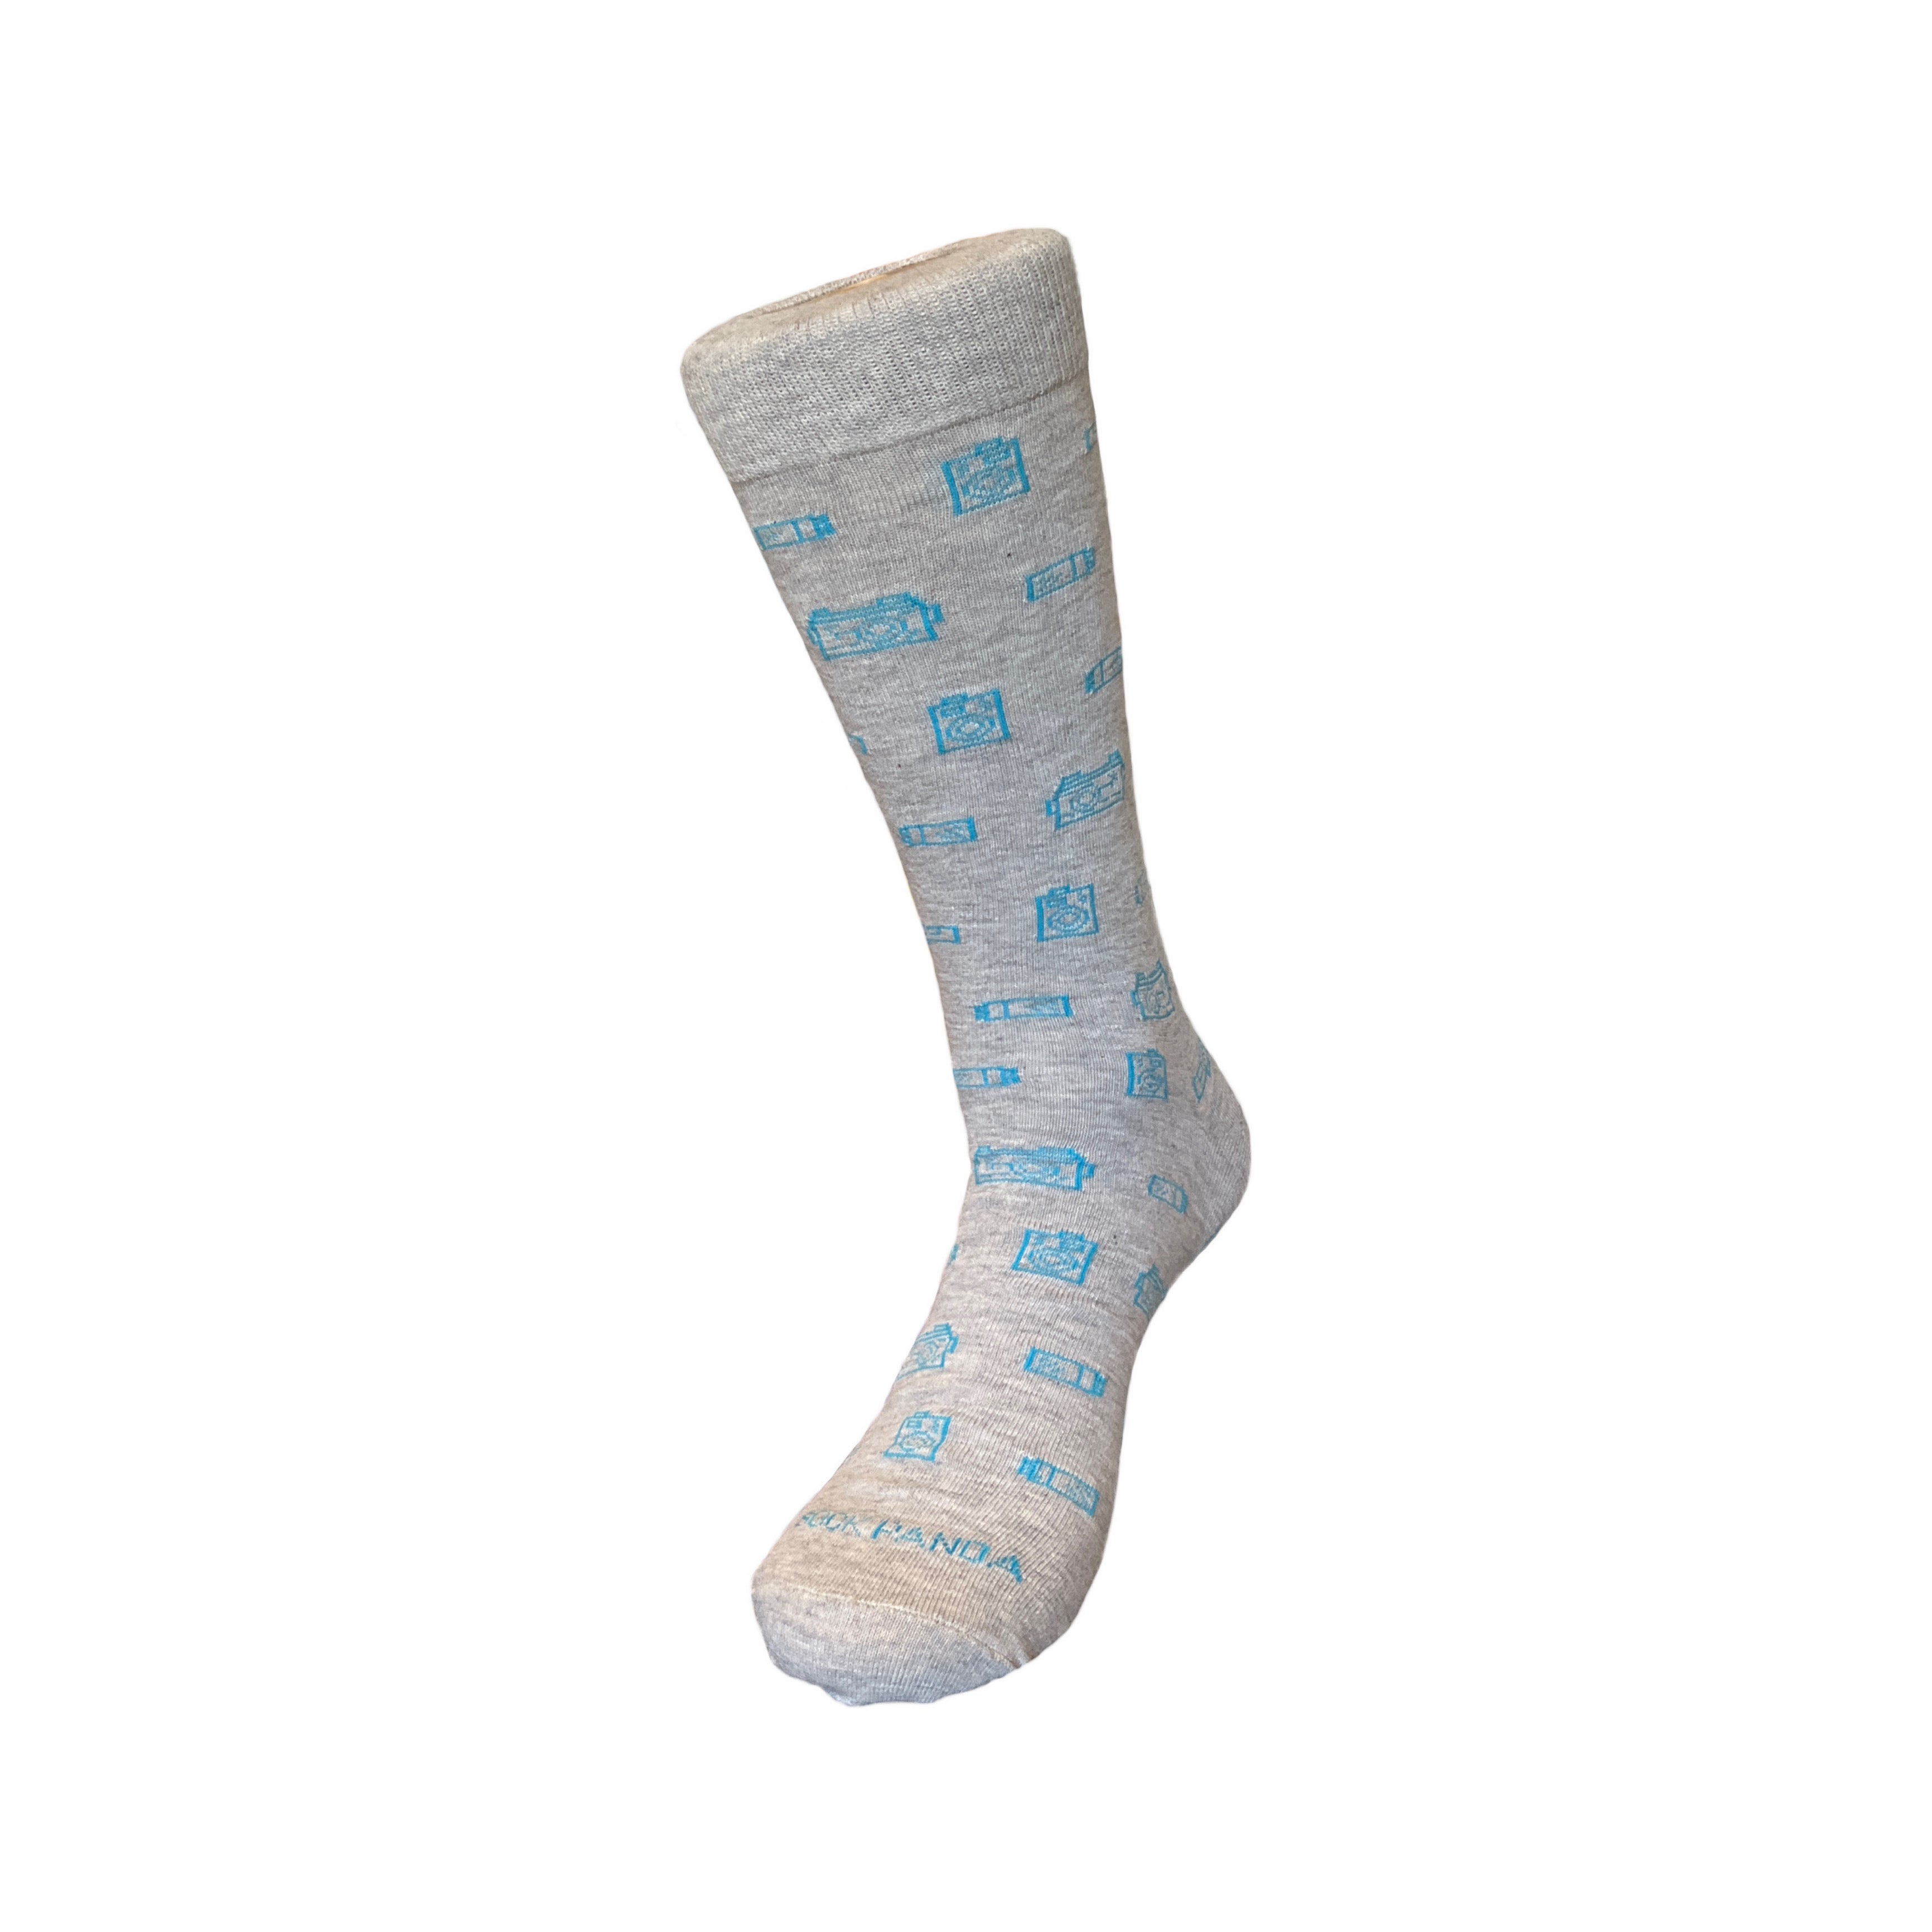 Camera Patterned Socks from the Sock Panda (Adult Large)